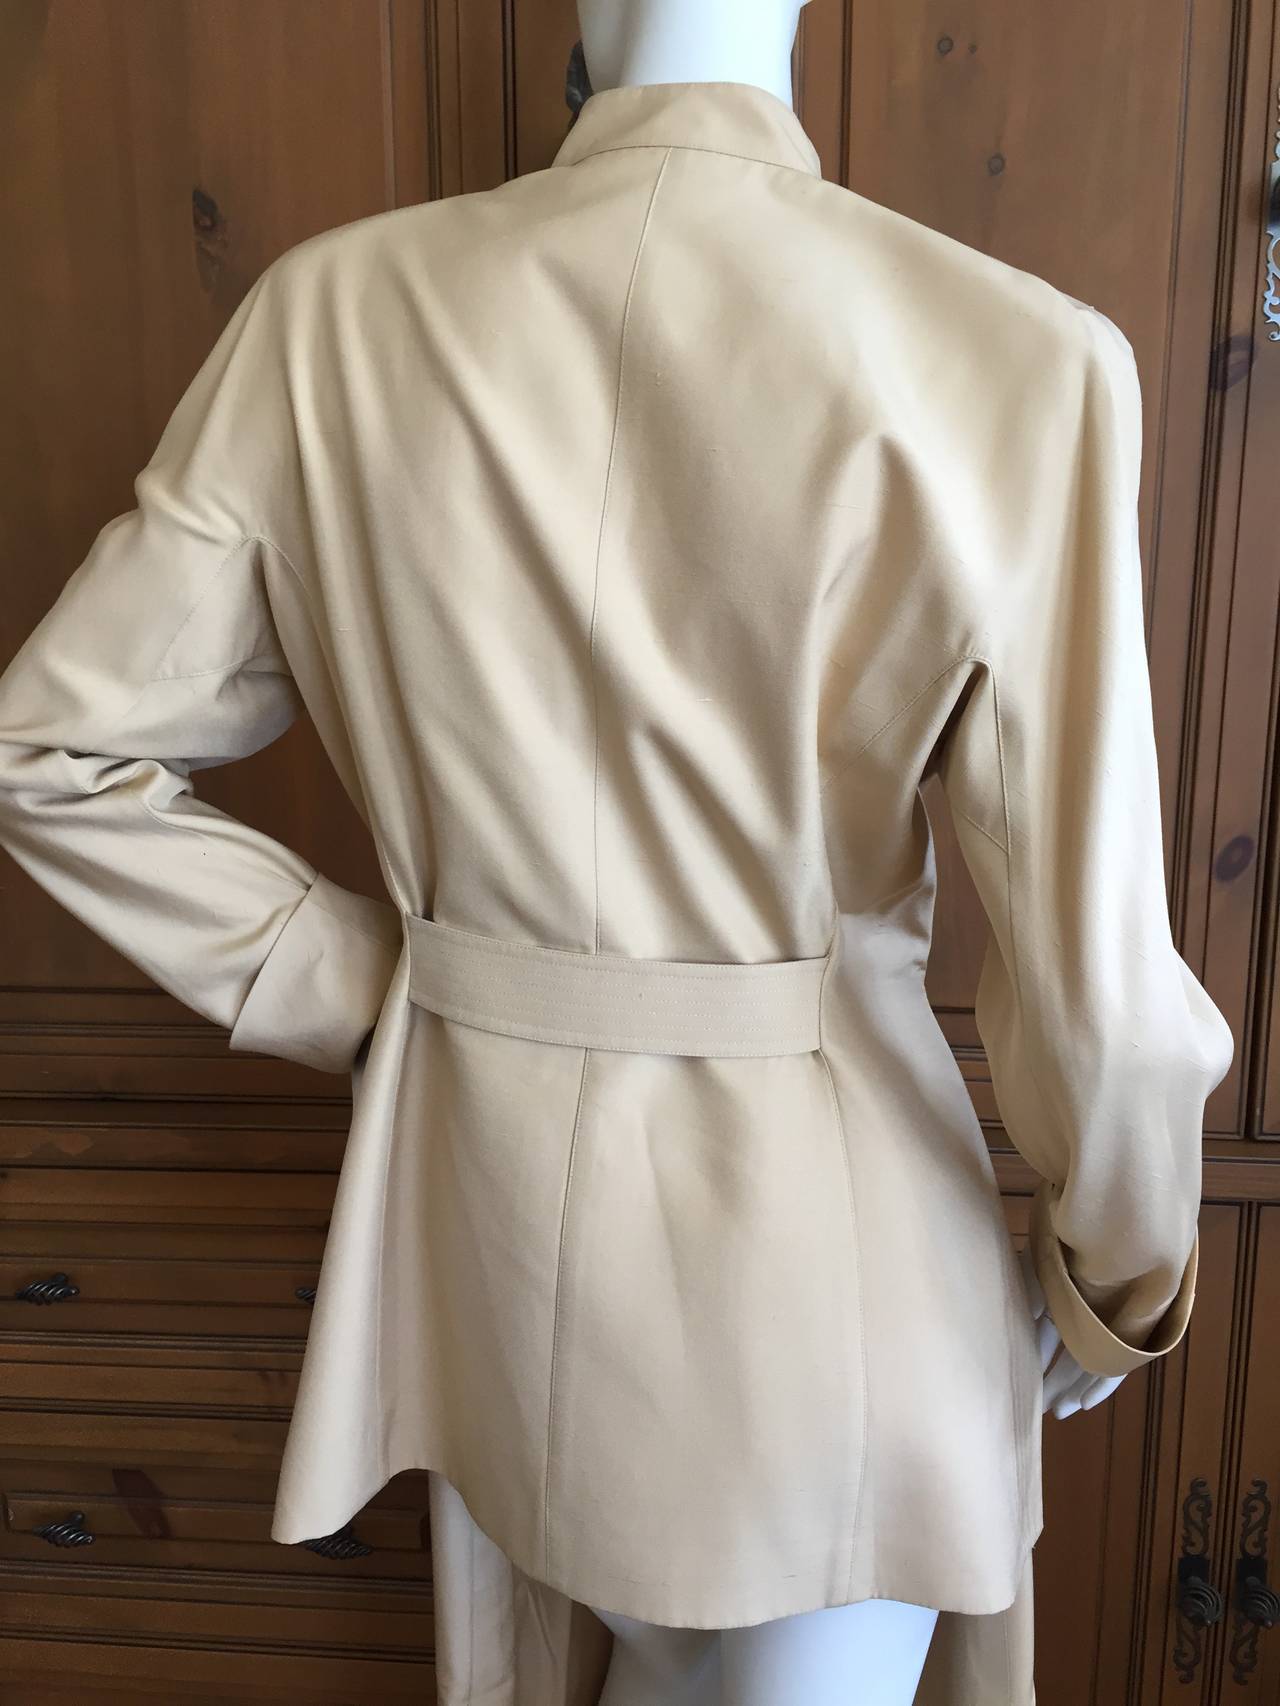 Thierry Mugler Sculptural Tan Silk Jacket In Excellent Condition For Sale In Cloverdale, CA